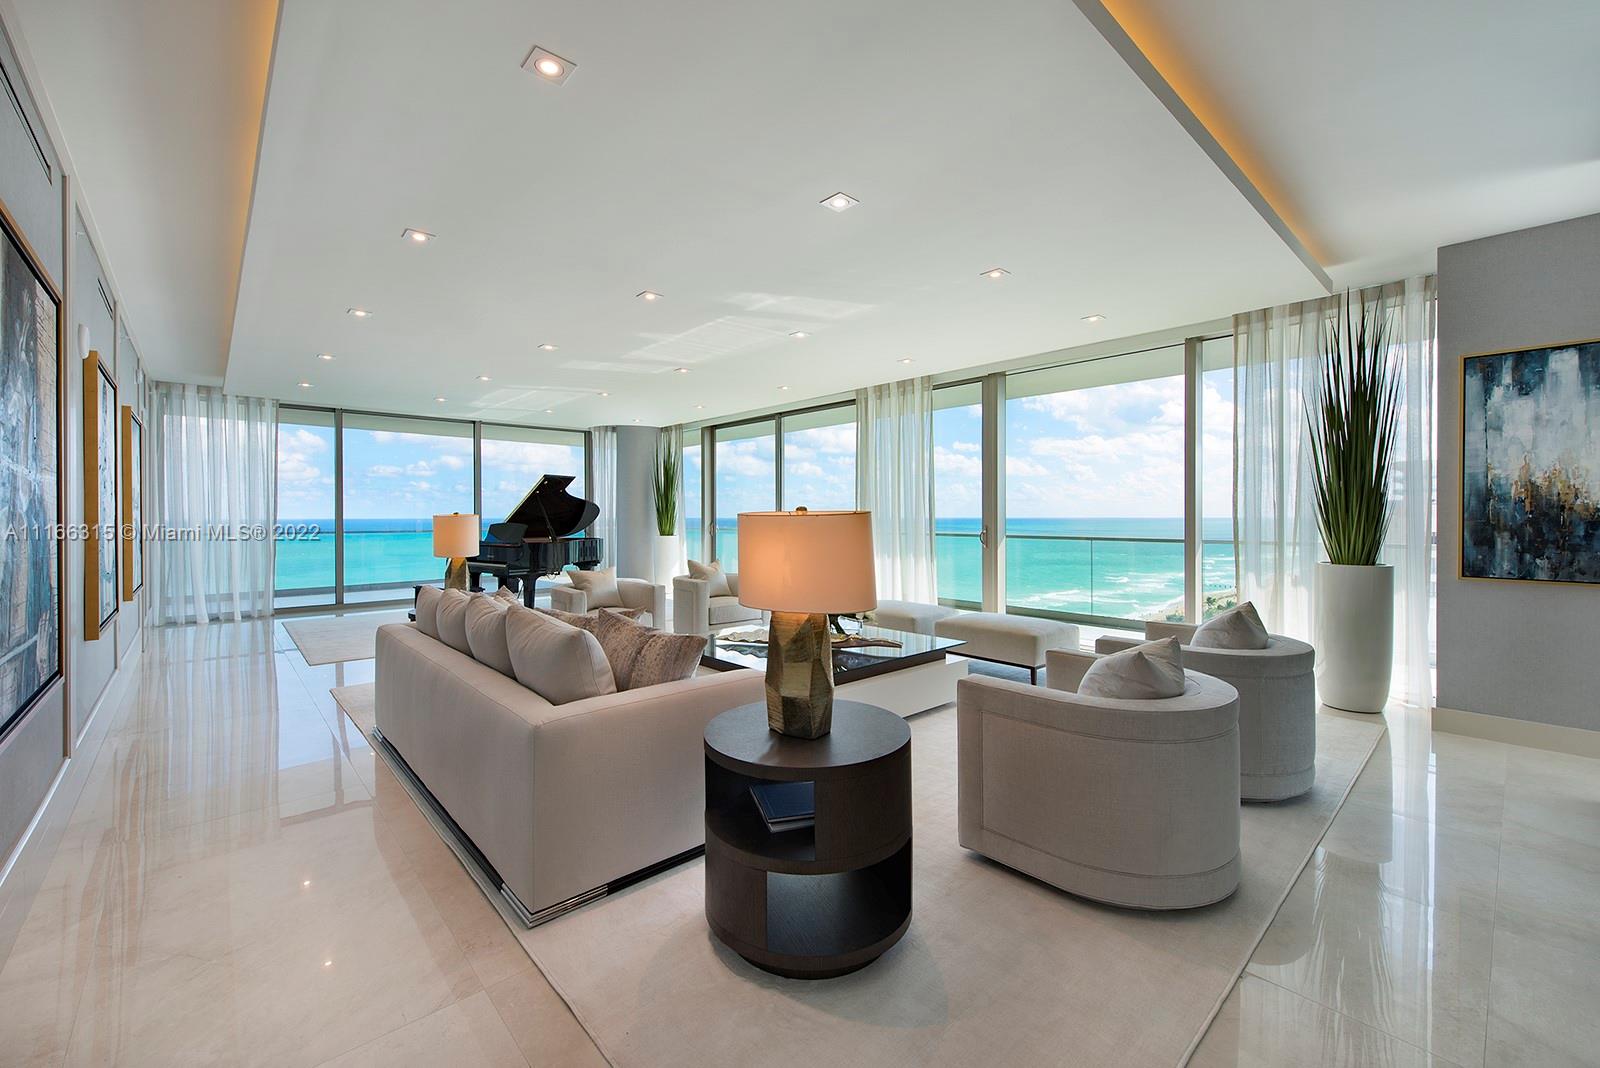 A high floor corner oceanfront condo at the ultra luxurious Oceana Bal Harbour.  This residence was designed, built and furnished by famed designer Steven G.  Extraordinary finishes from top to bottom. Over 5700 sqft of indoor and outdoor living space, with wraparound terraces facing East, South and West. Kitchen appliances by Gaggeneau. Bathroom fixtures by Boffi, Toto and Duravit. Integrated sound system, mesh WiFi and large screen televisions throughout. Wine room. Private parking spaces directly at garage elevator entry. Purchase includes furniture, electronics and equipment.  Oceana Bal Harbour is a five-star oceanfront, gated, secure community located near the Shops of Bal Harbour, restaurants and more.